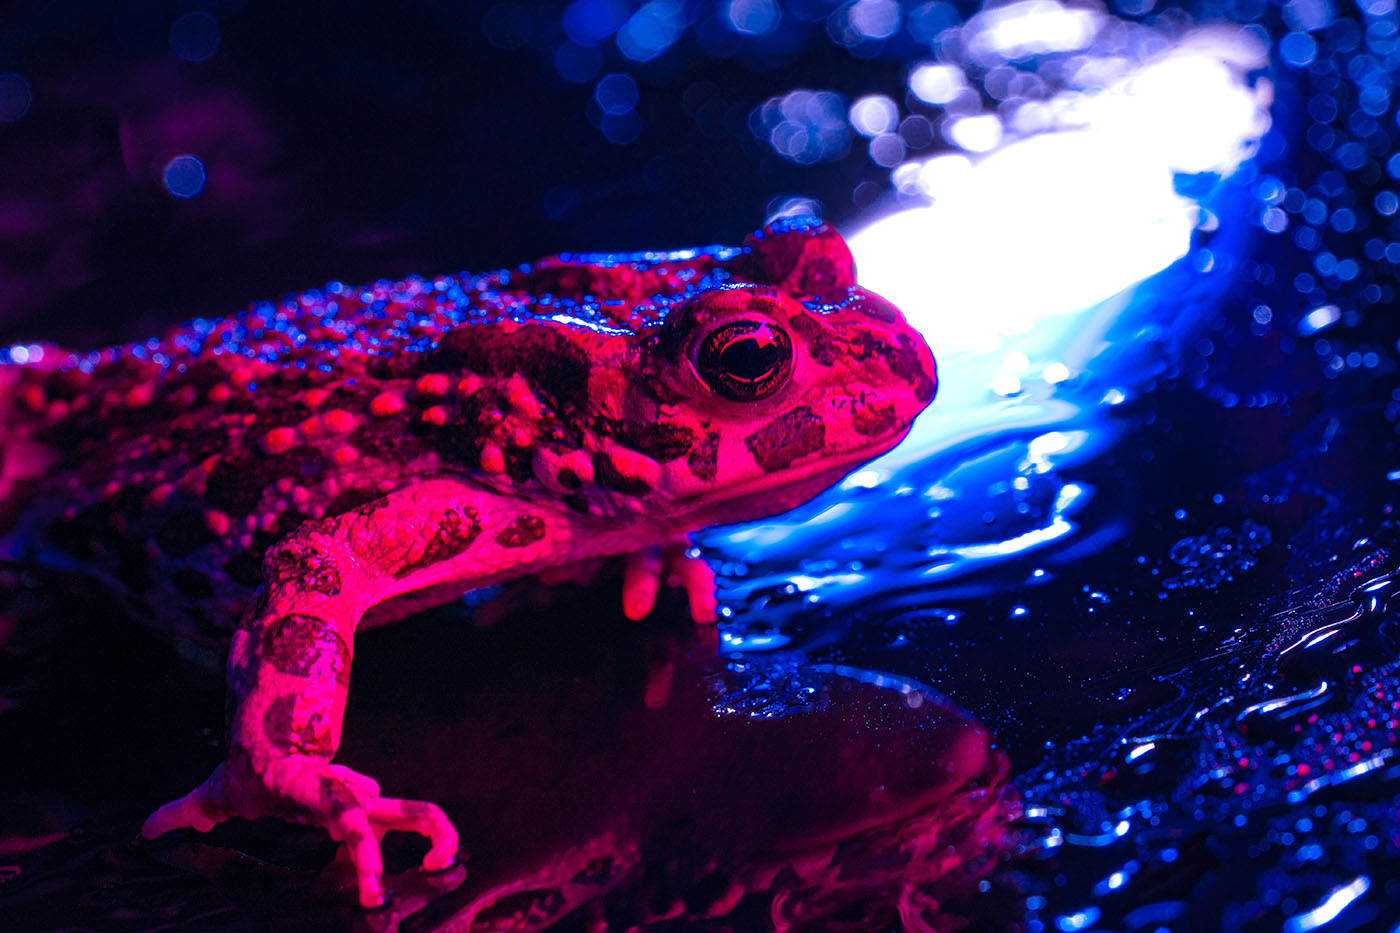 Wild ground toad under rain drops, close-up night shot, blue neon colorful light. Natterjack breathing and looking at camera. Amazing frog blinks eyes, stirs nostrils, macro. Dark background.